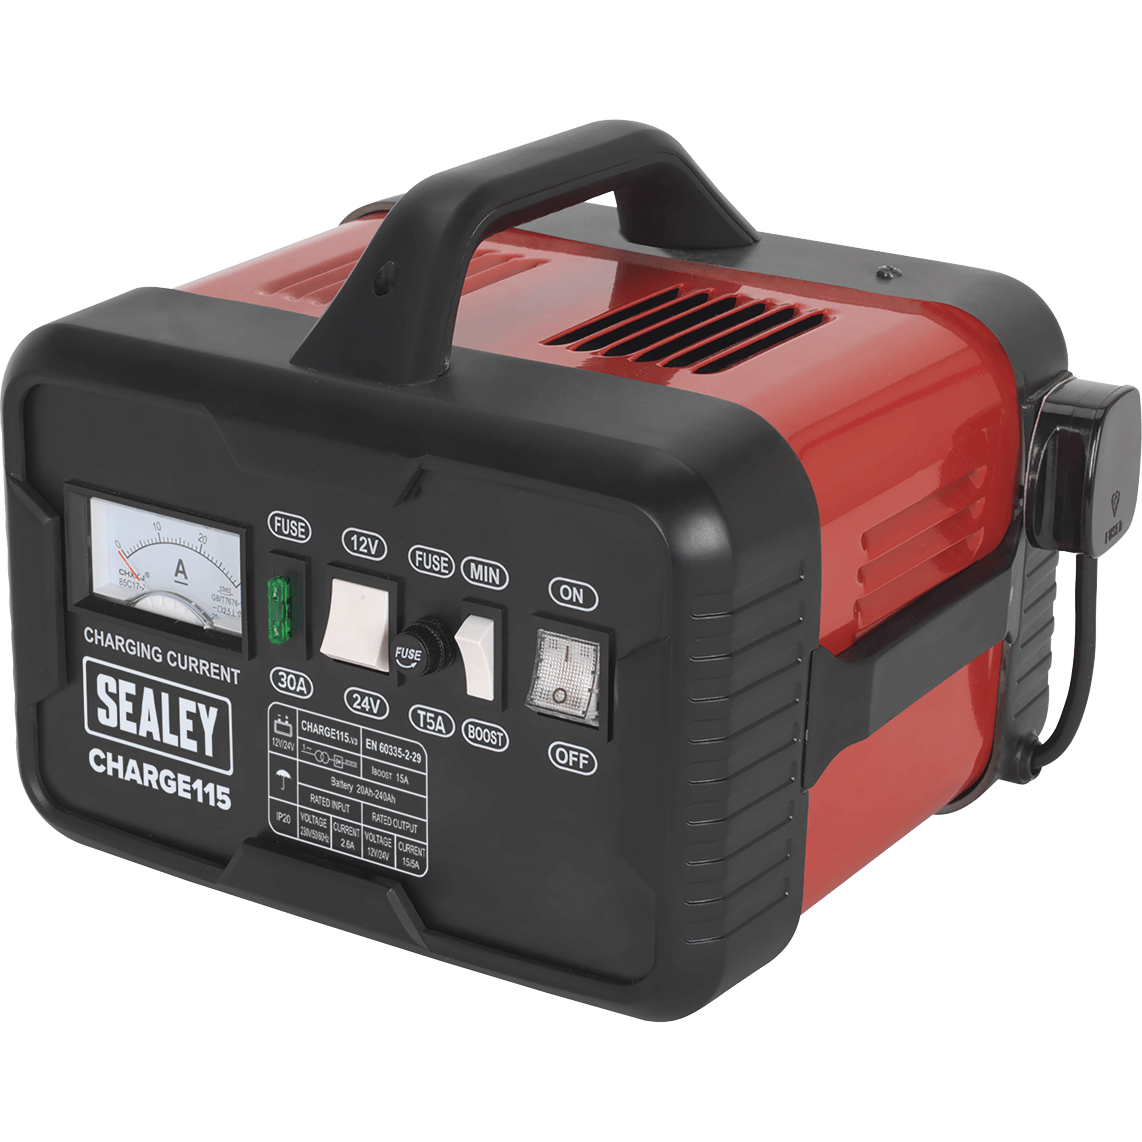 Sealey CHARGE115 Automotive Battery Charger 12v or 24v